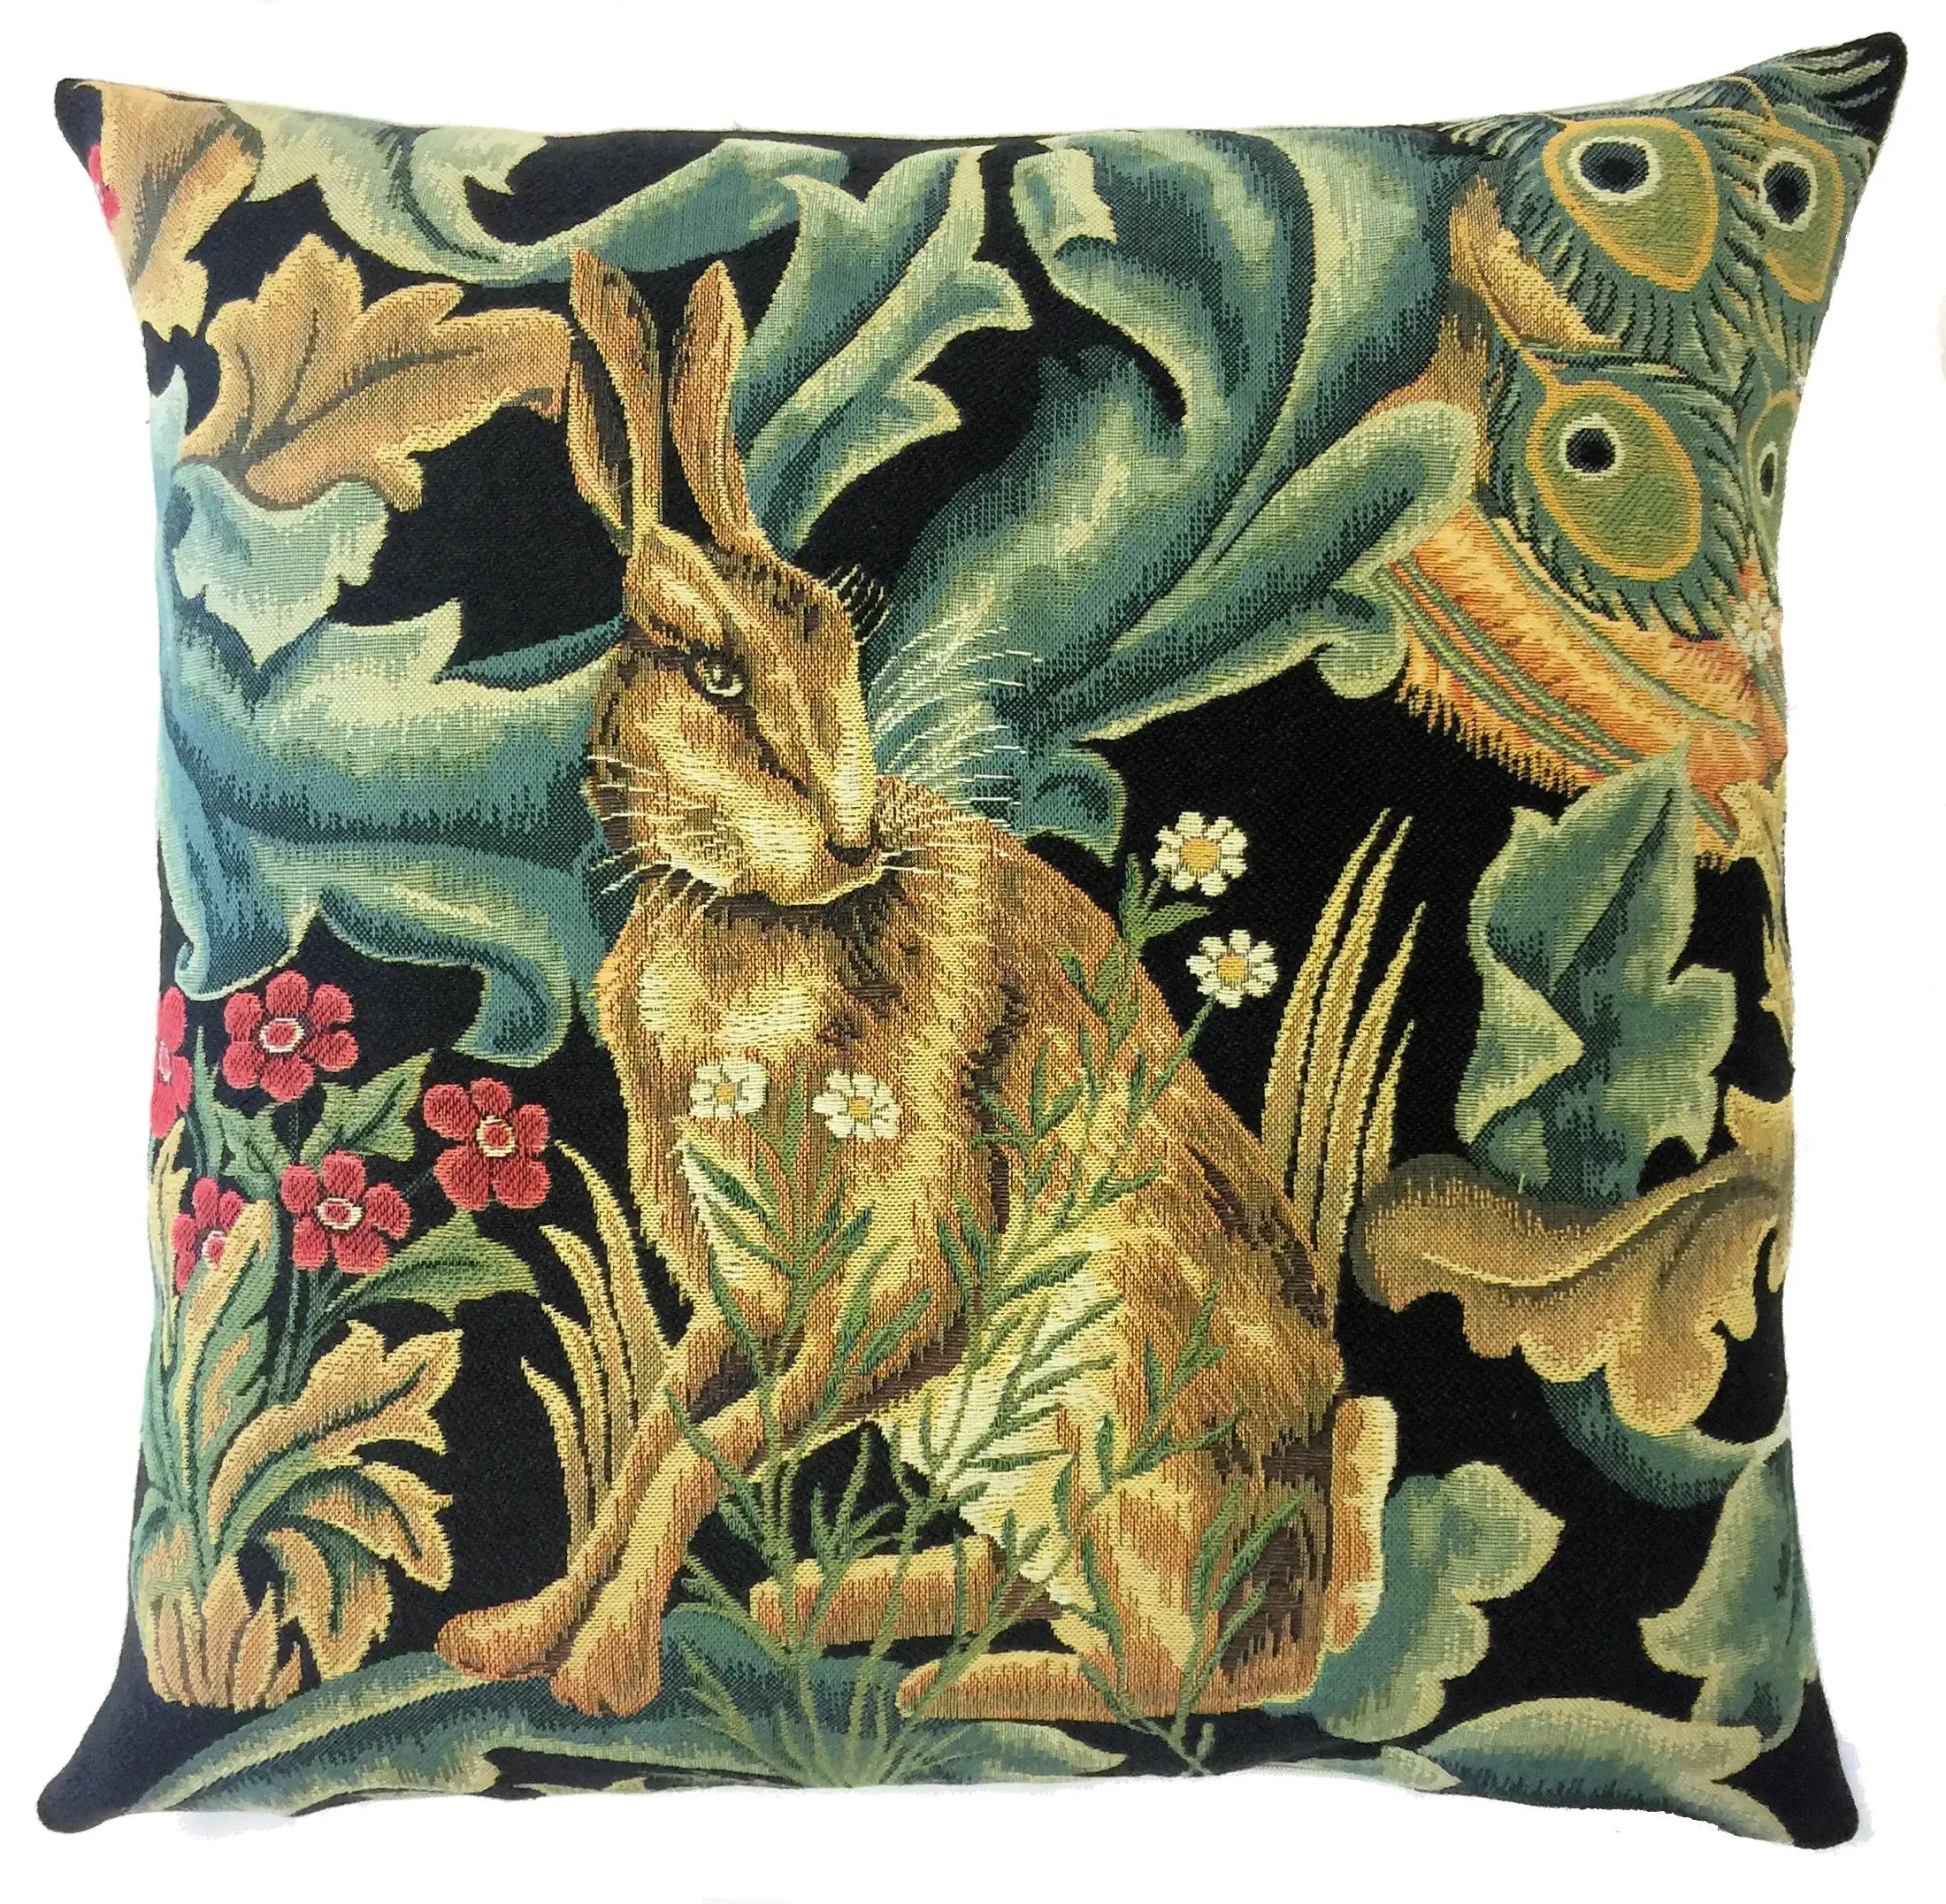 Black Forest Hare by William Morris Belgian Jacquard Woven Pillow